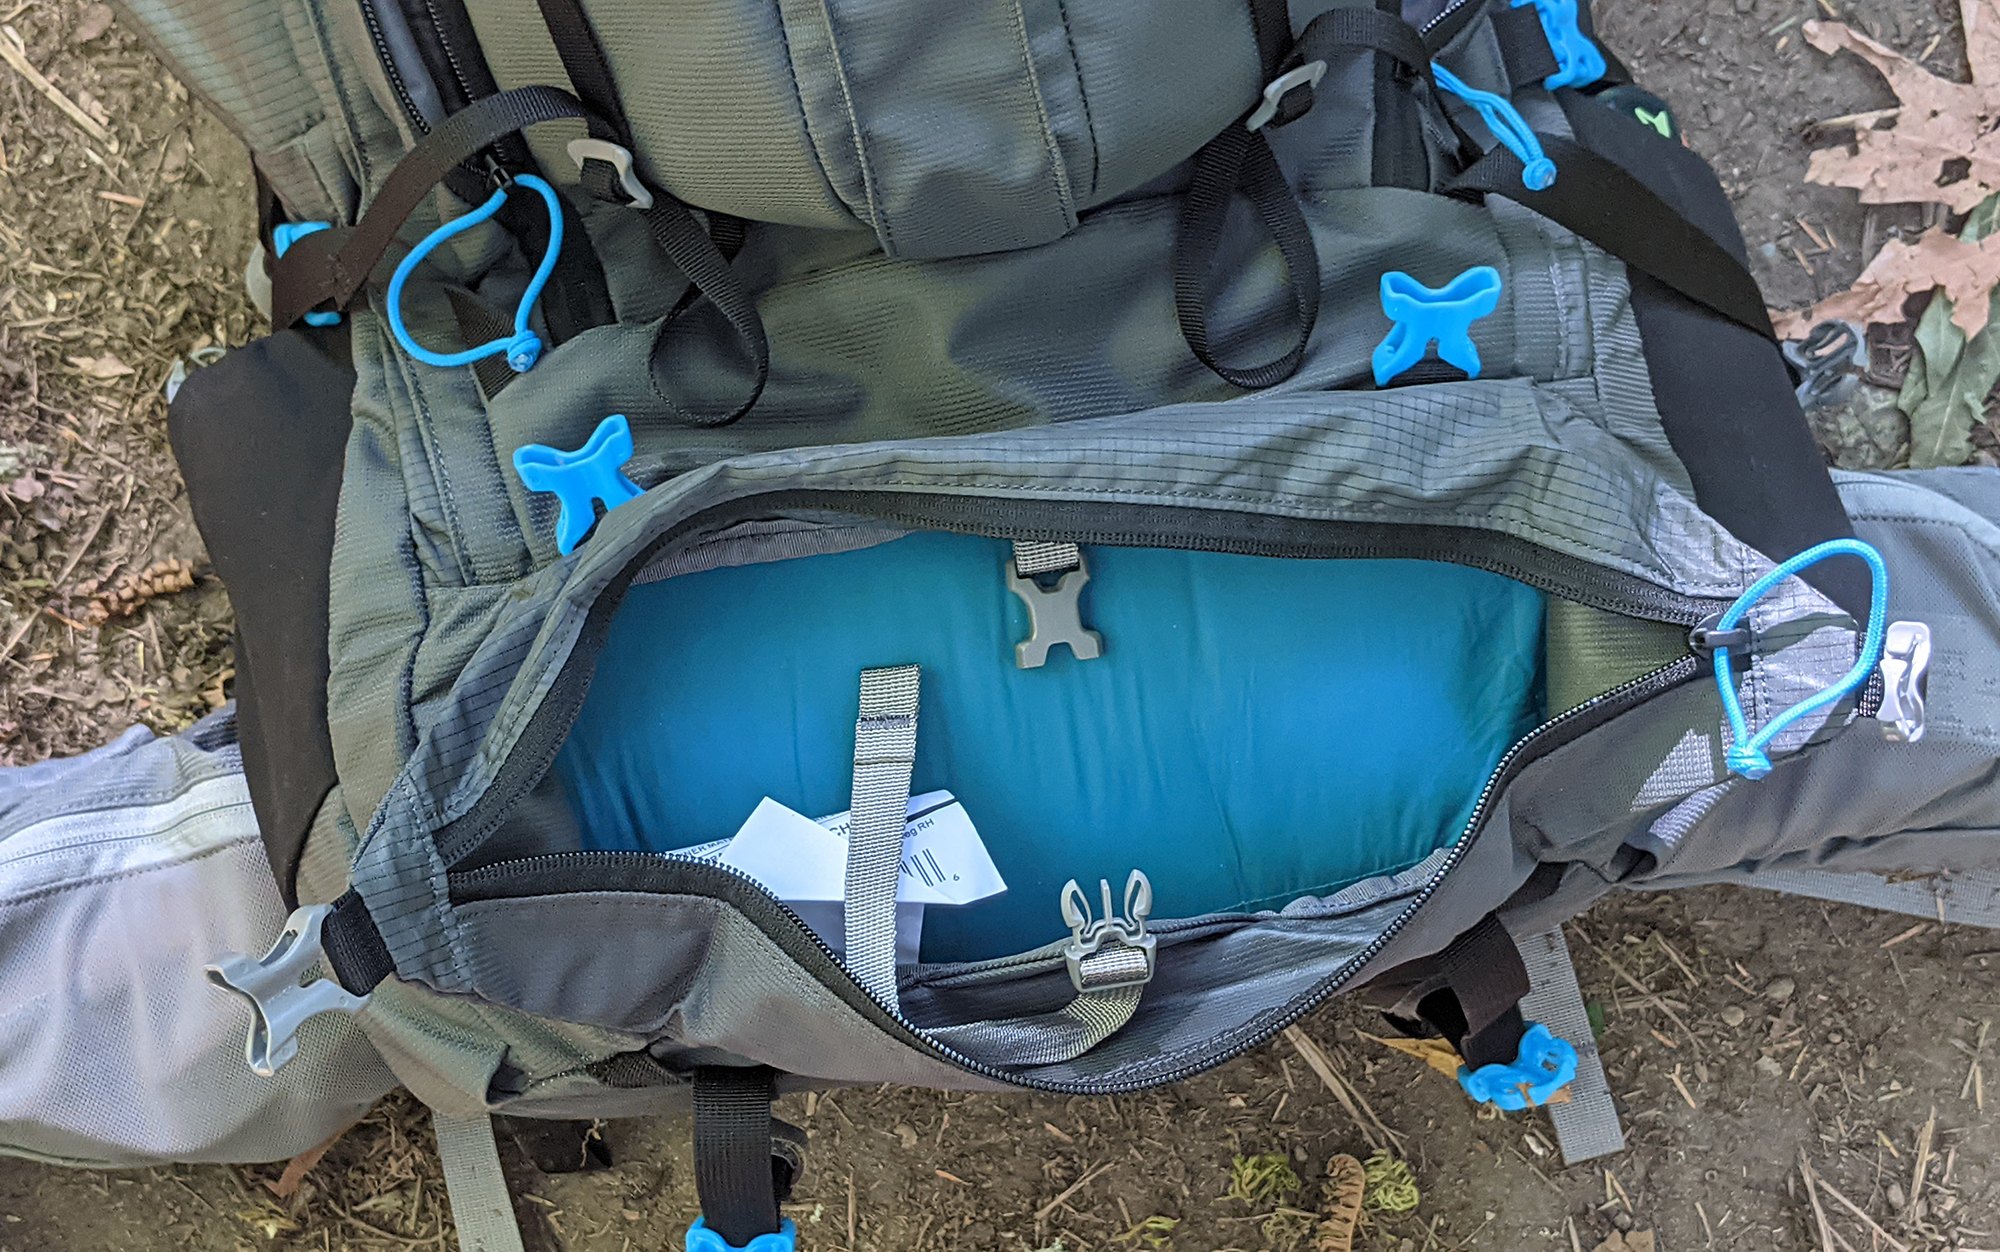 The sleeping bag compartment just barely fit a 30-degree Kelty Cosmic Down sleeping bag.